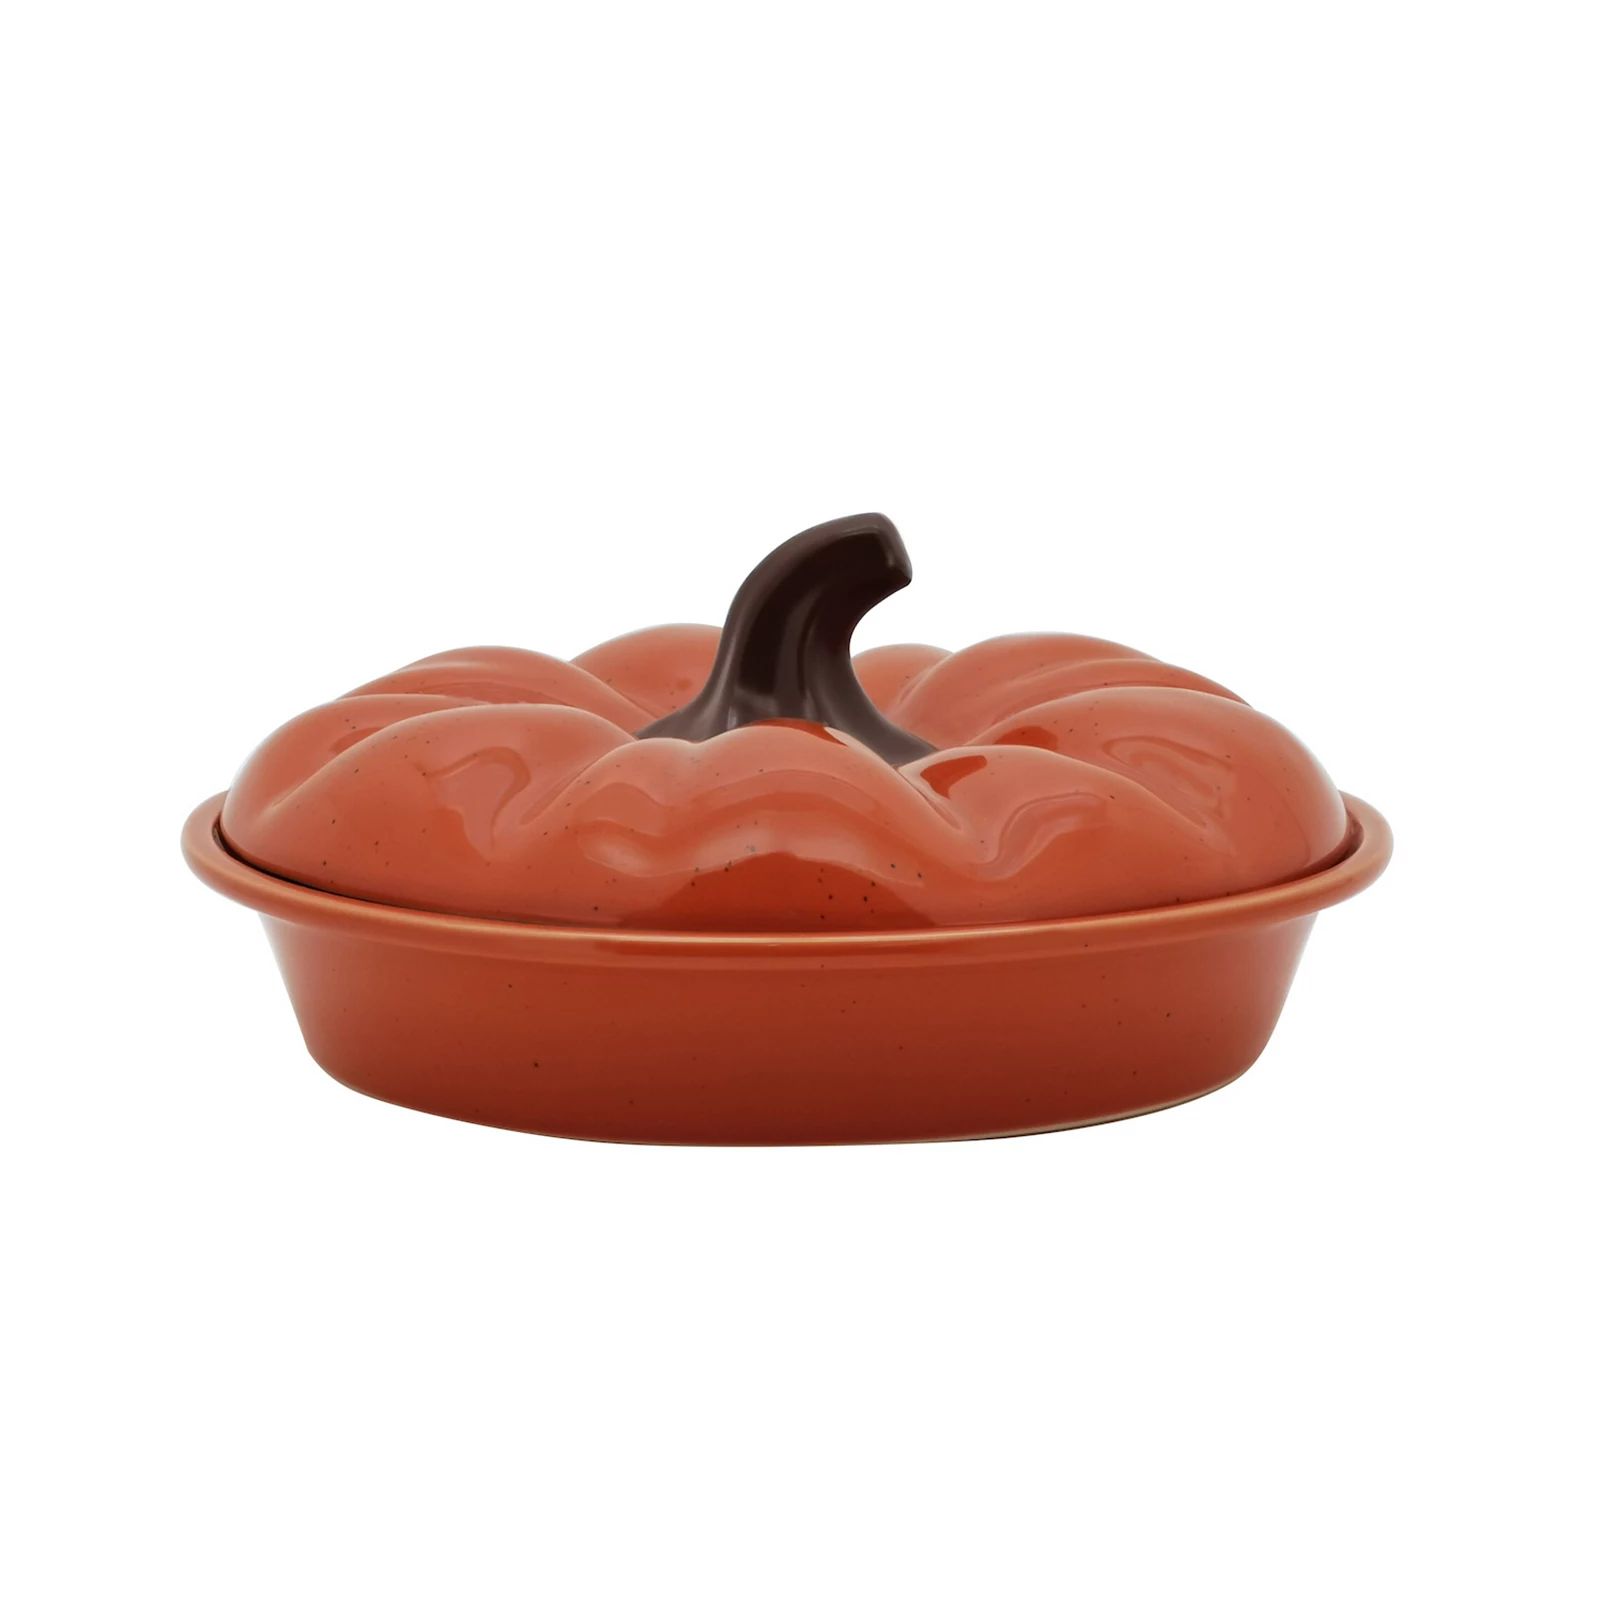 Celebrate Together Fall Pumpkin Pie Plate with Lid, Multicolor | Kohl's